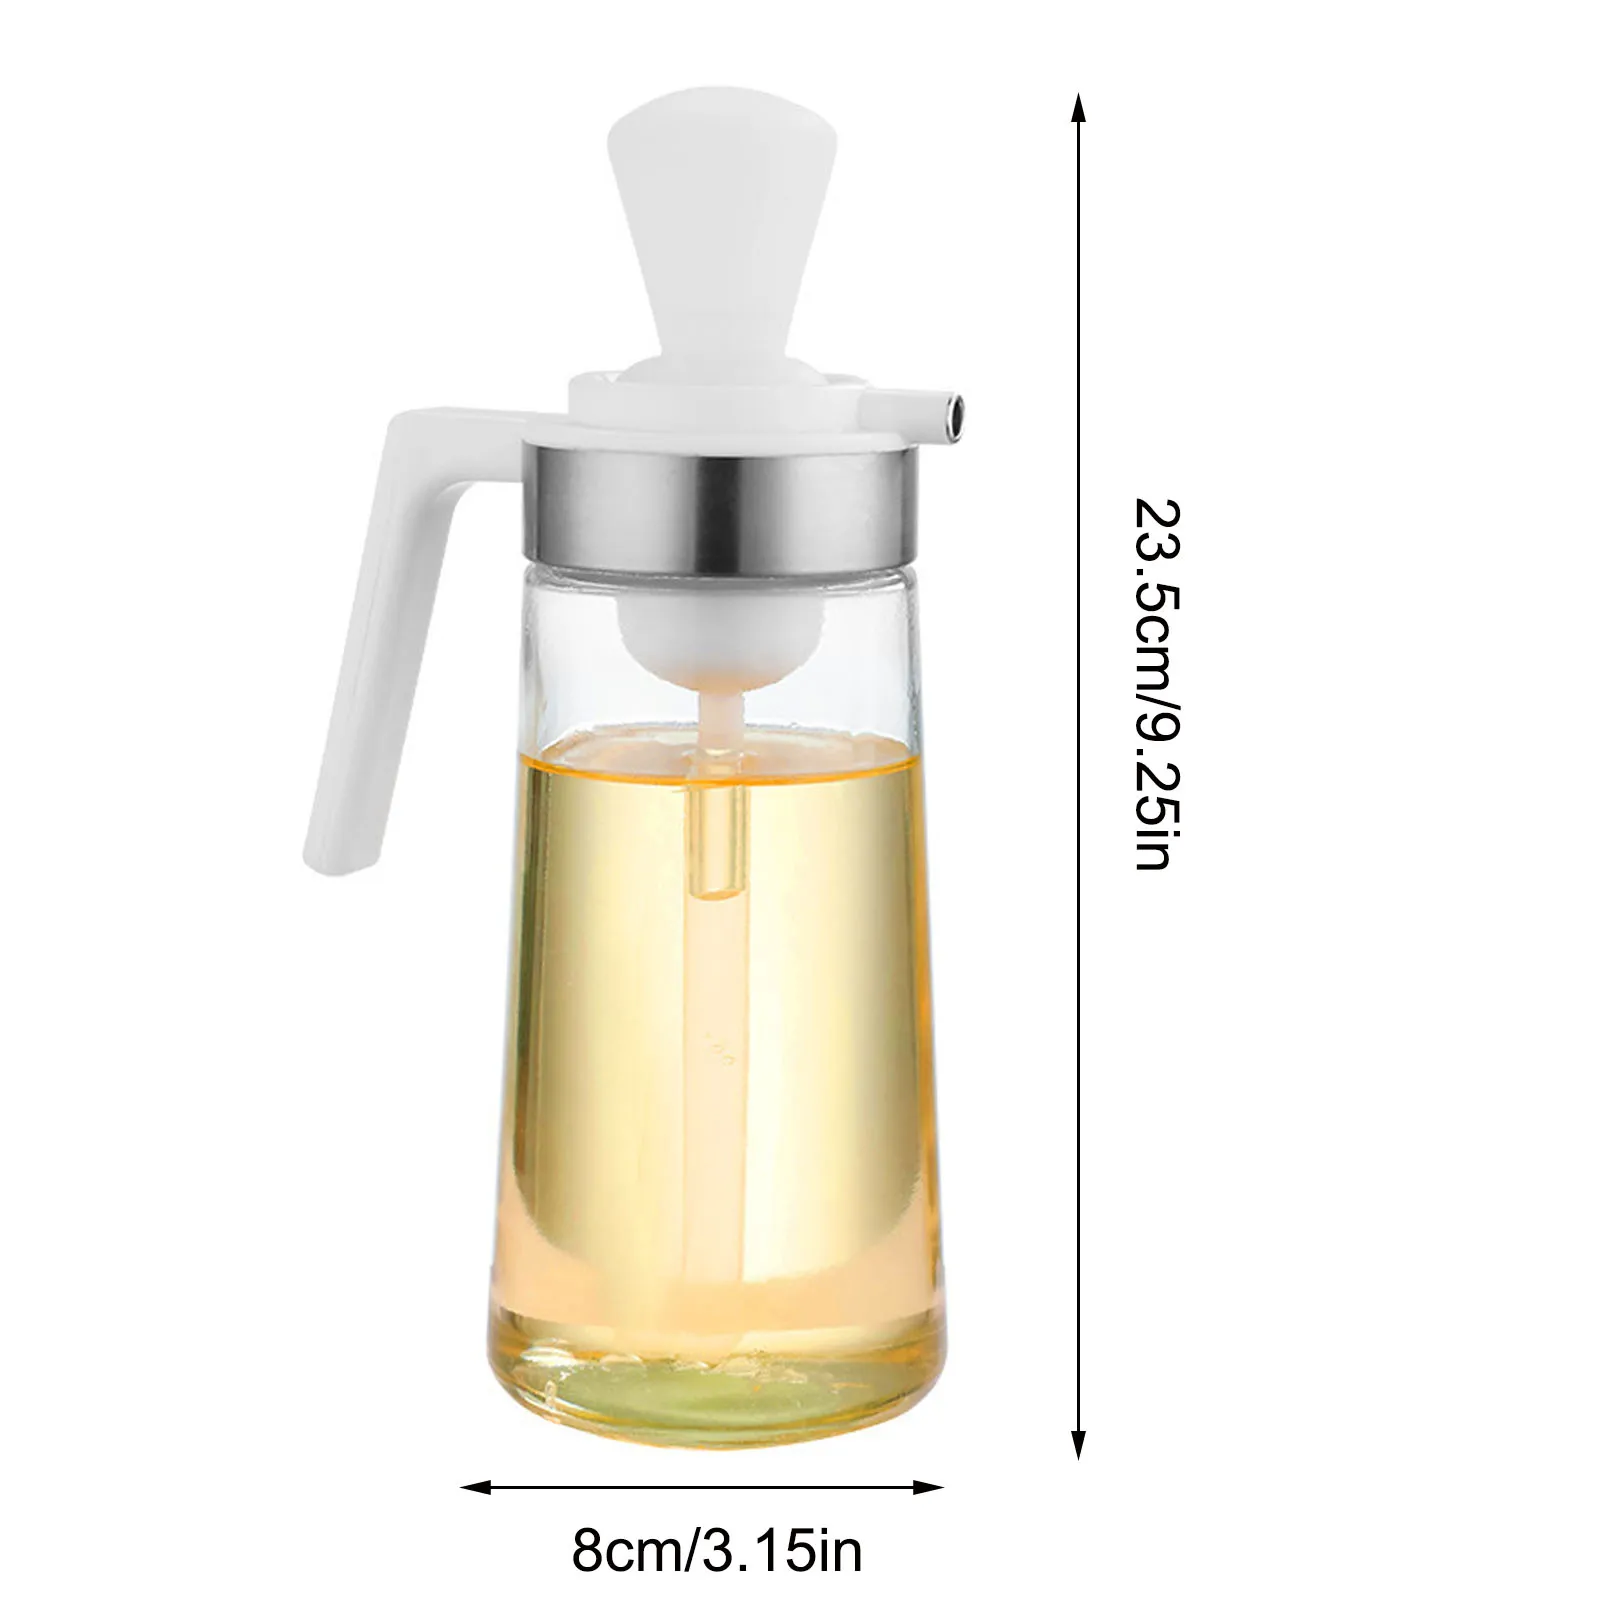 https://ae01.alicdn.com/kf/Sb7859684bbcc426eb580d8e76b7e6072O/2-In-1-Oil-Bottle-with-Brush-Glass-Sauce-Container-Cooking-Oil-Dispenser-for-Kitchen-Cooking.jpg